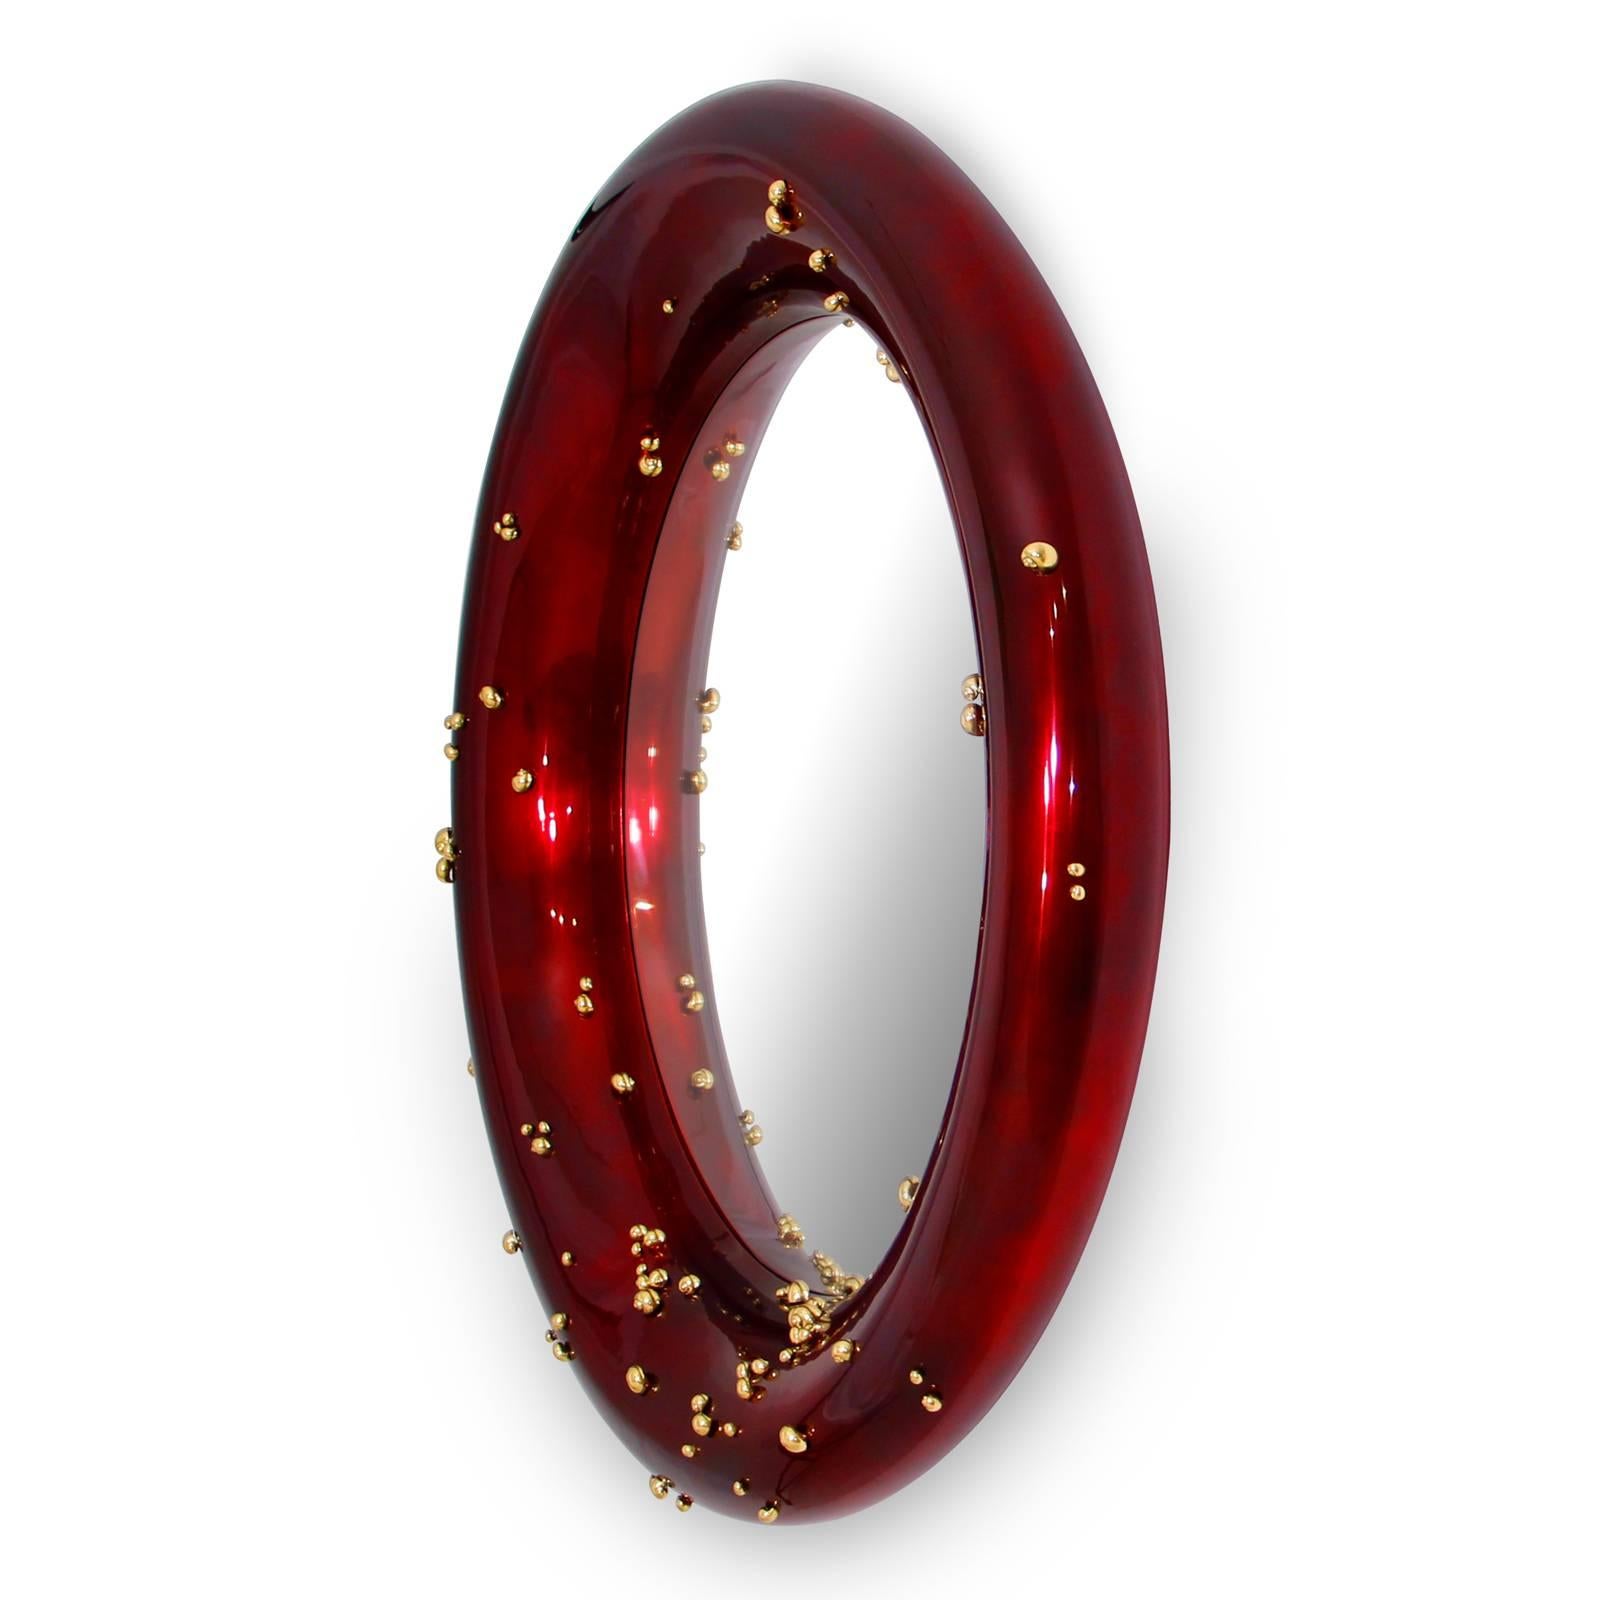 Mirror Red with carved wooden frame with
red-dark glossy varnished with clear round 
mirror glass. Decorated with small snails in
polished solid brass all around the frame.
